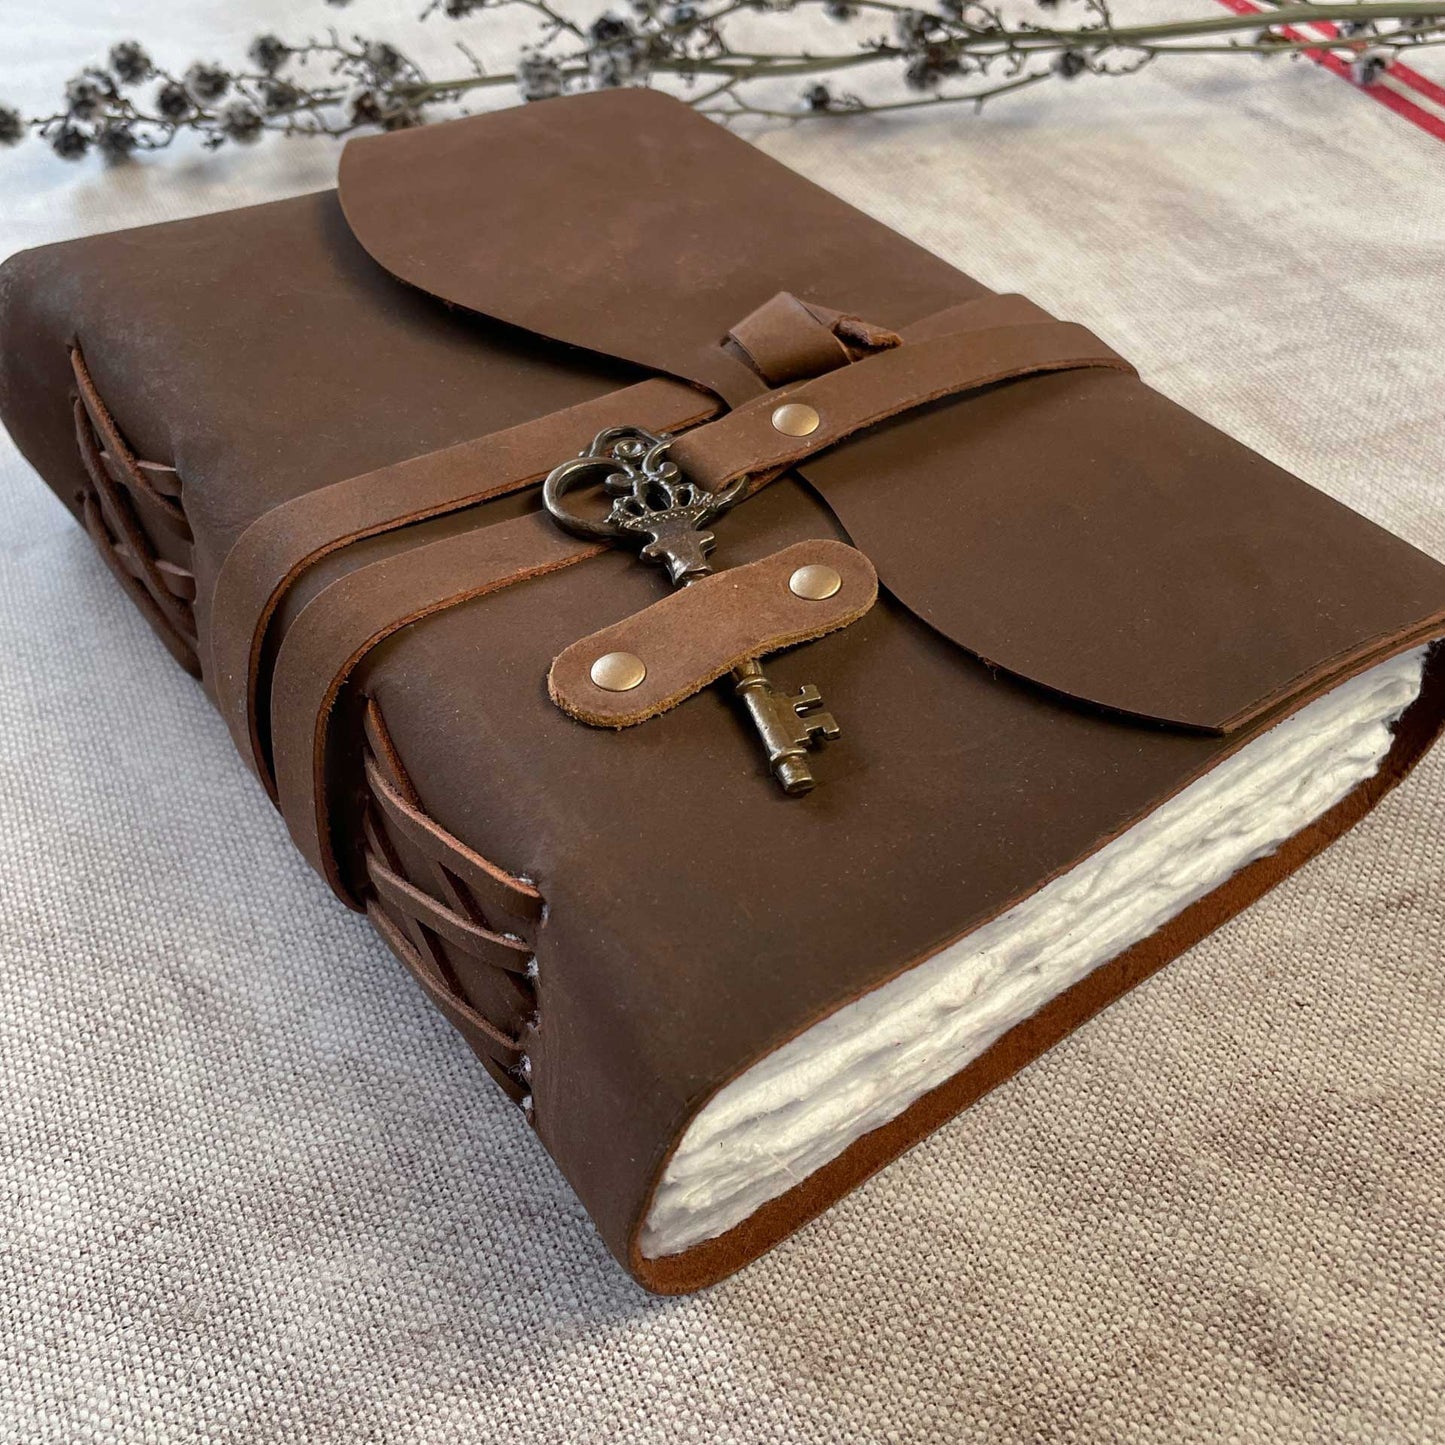 Beautiful hand bound leather notebook with key and loop fastening.  Handmade recycled cotton rag paper pages.  Beatuful rustic leather journal.